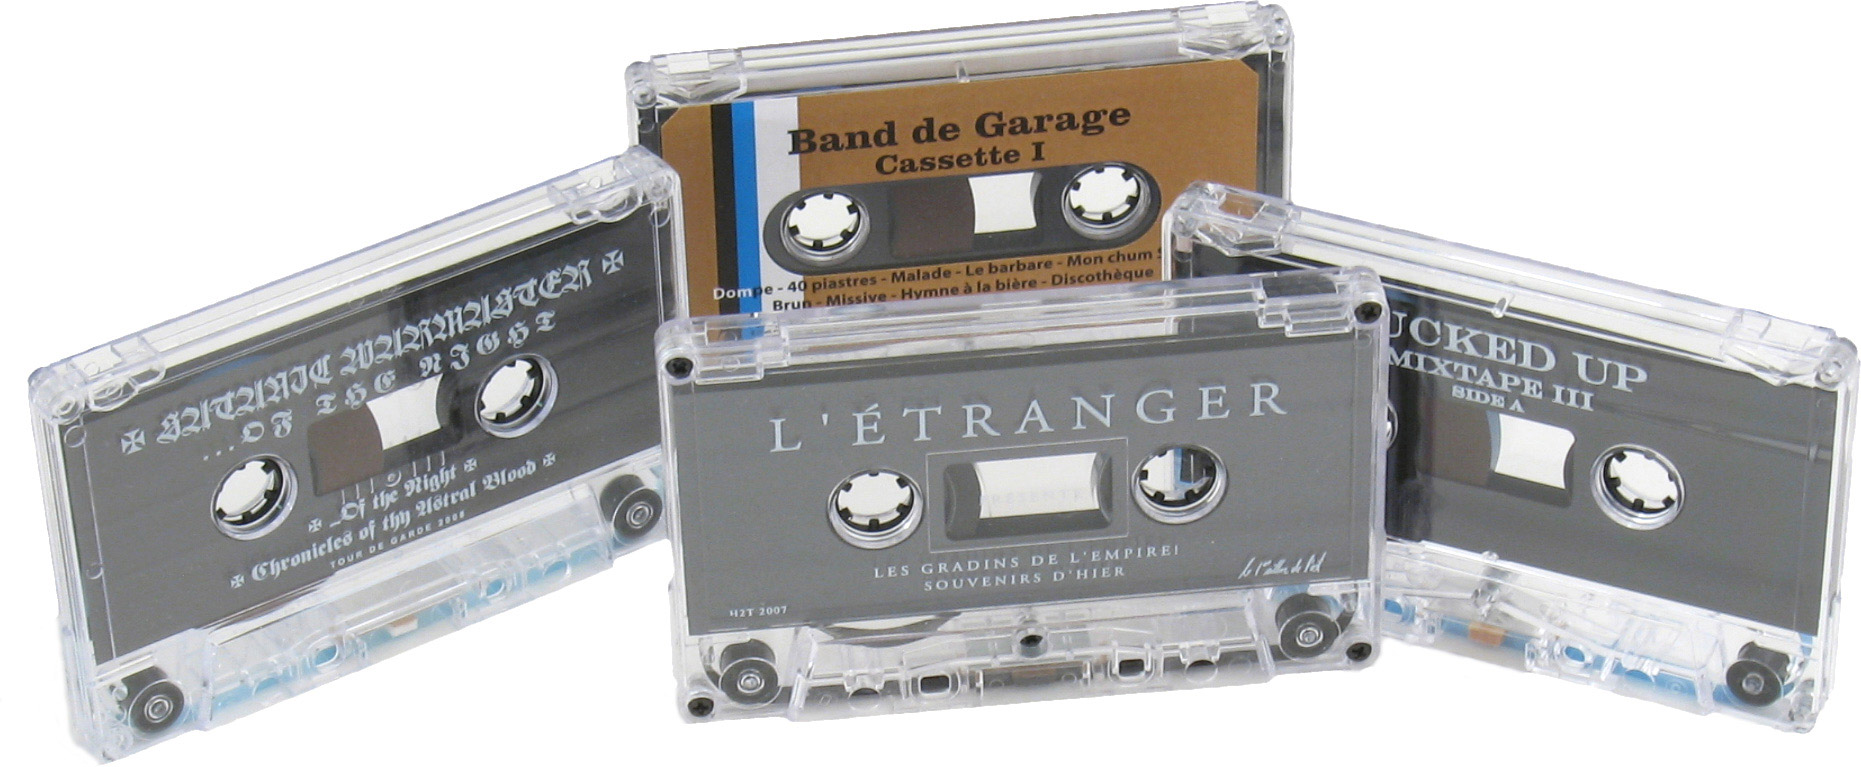 Early examples of the audio cassette revival 